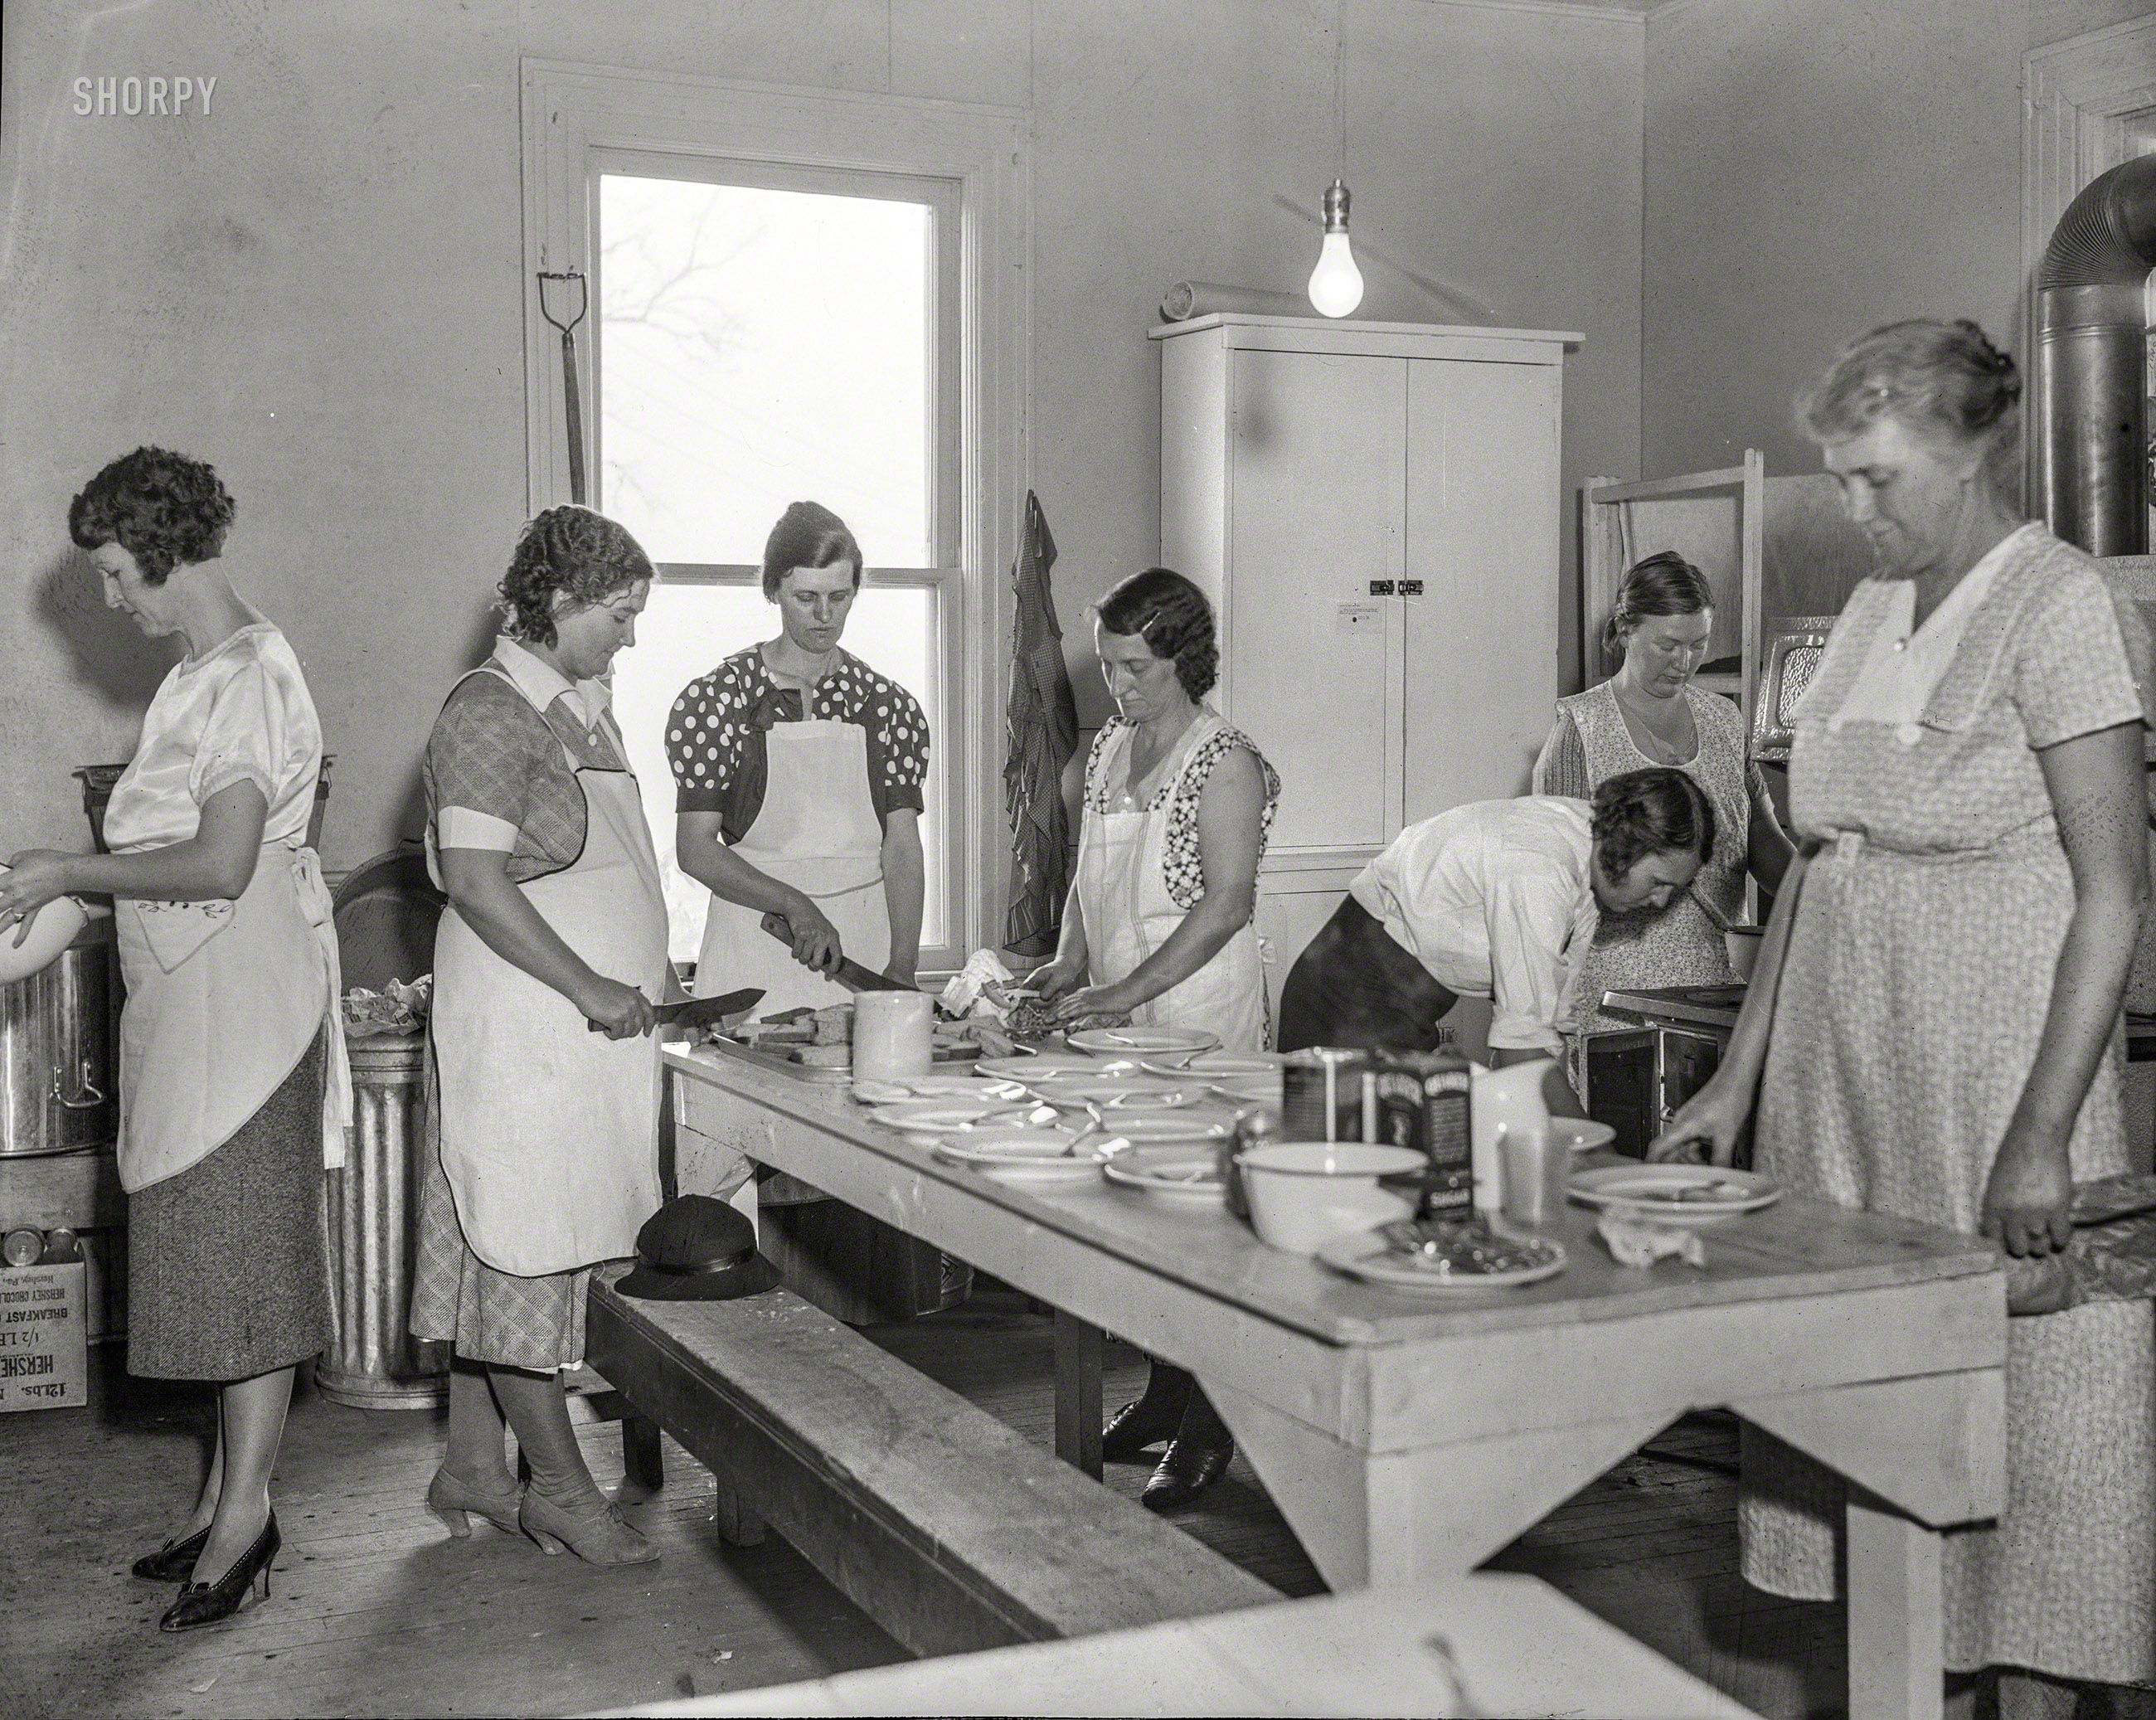 April 1935. "Women volunteers preparing school lunch. Reedsville, West Virginia." Photo by Elmer S. Johnson for the Resettlement Administration. View full size.